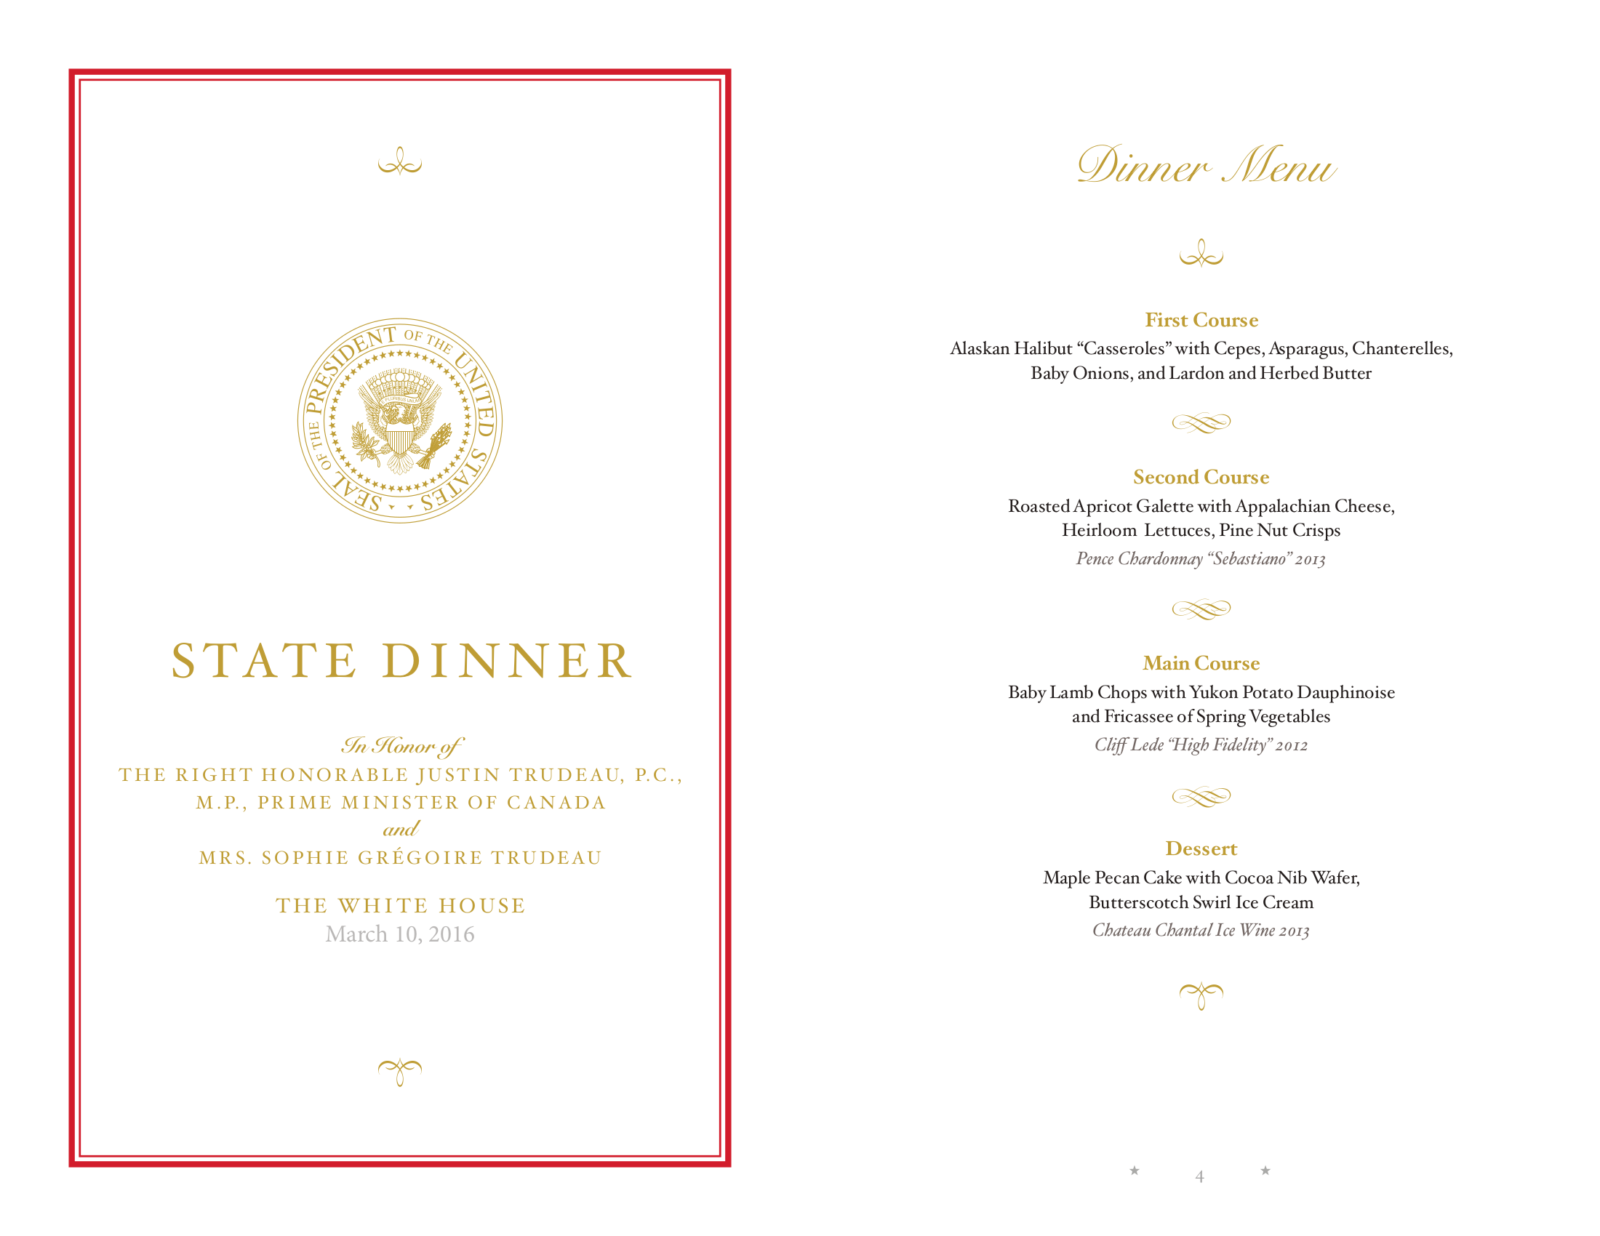 Menu from the March 10th White House State Dinner